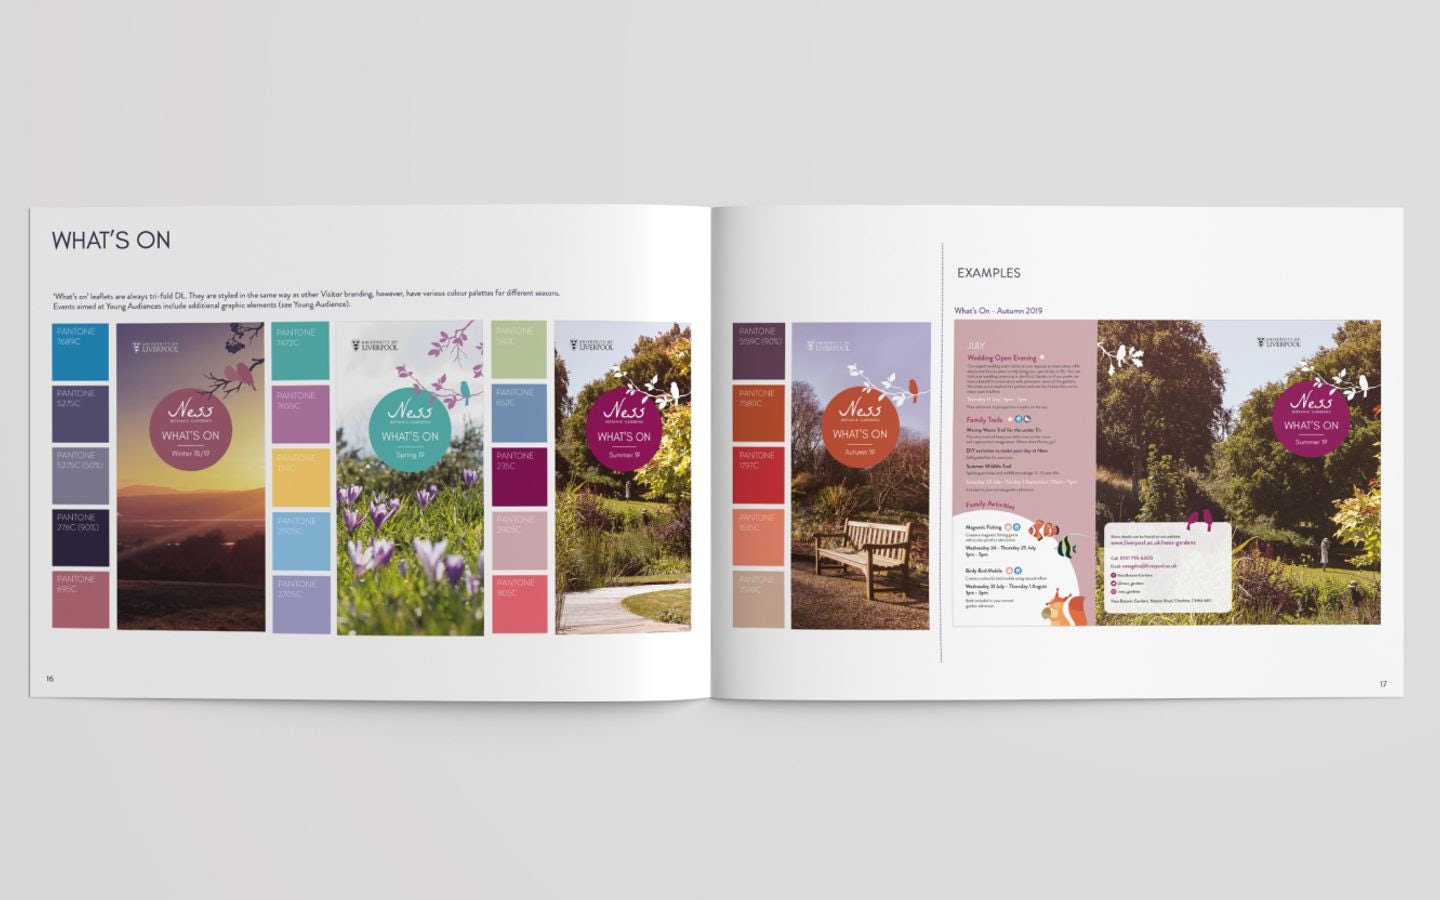 Open brochure layout showing seasonal event flyers for Ness Botanic Gardens, with colour palettes and garden photography for each season.